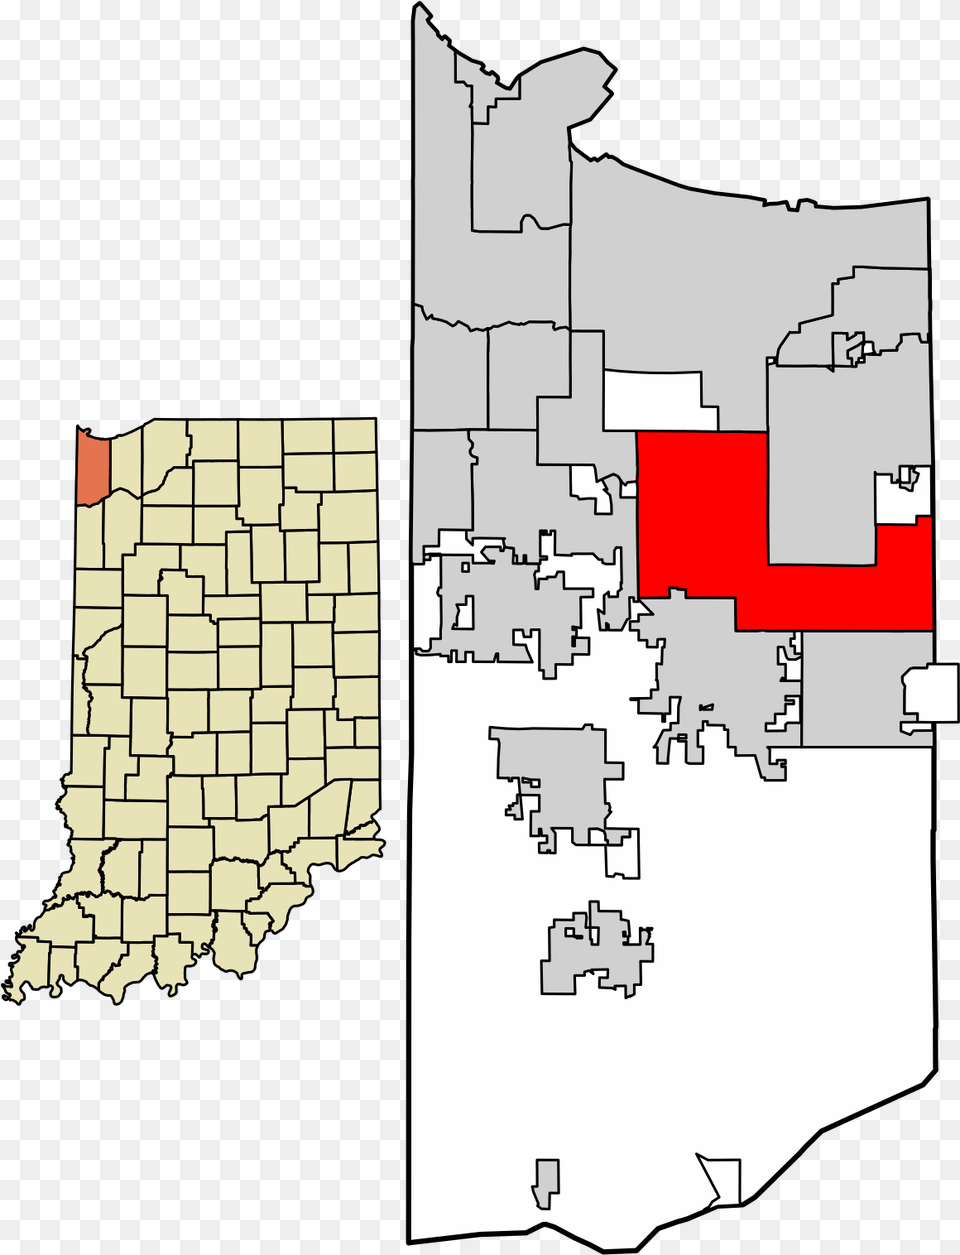 Merrillville Indiana City Limits Free Transparent Png